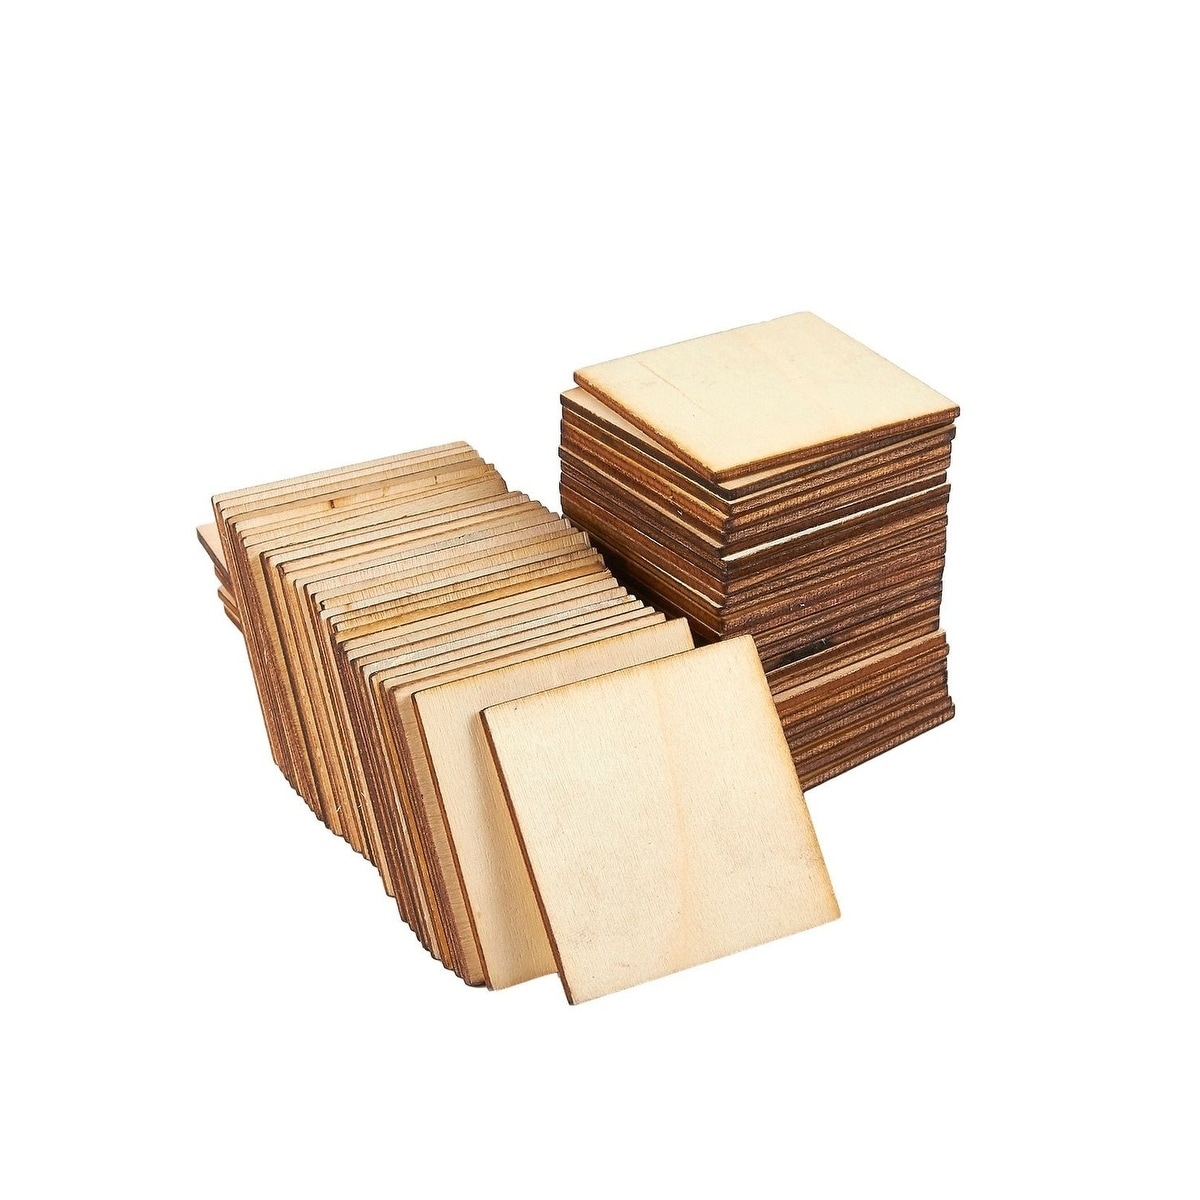 unfinished wood square tiles